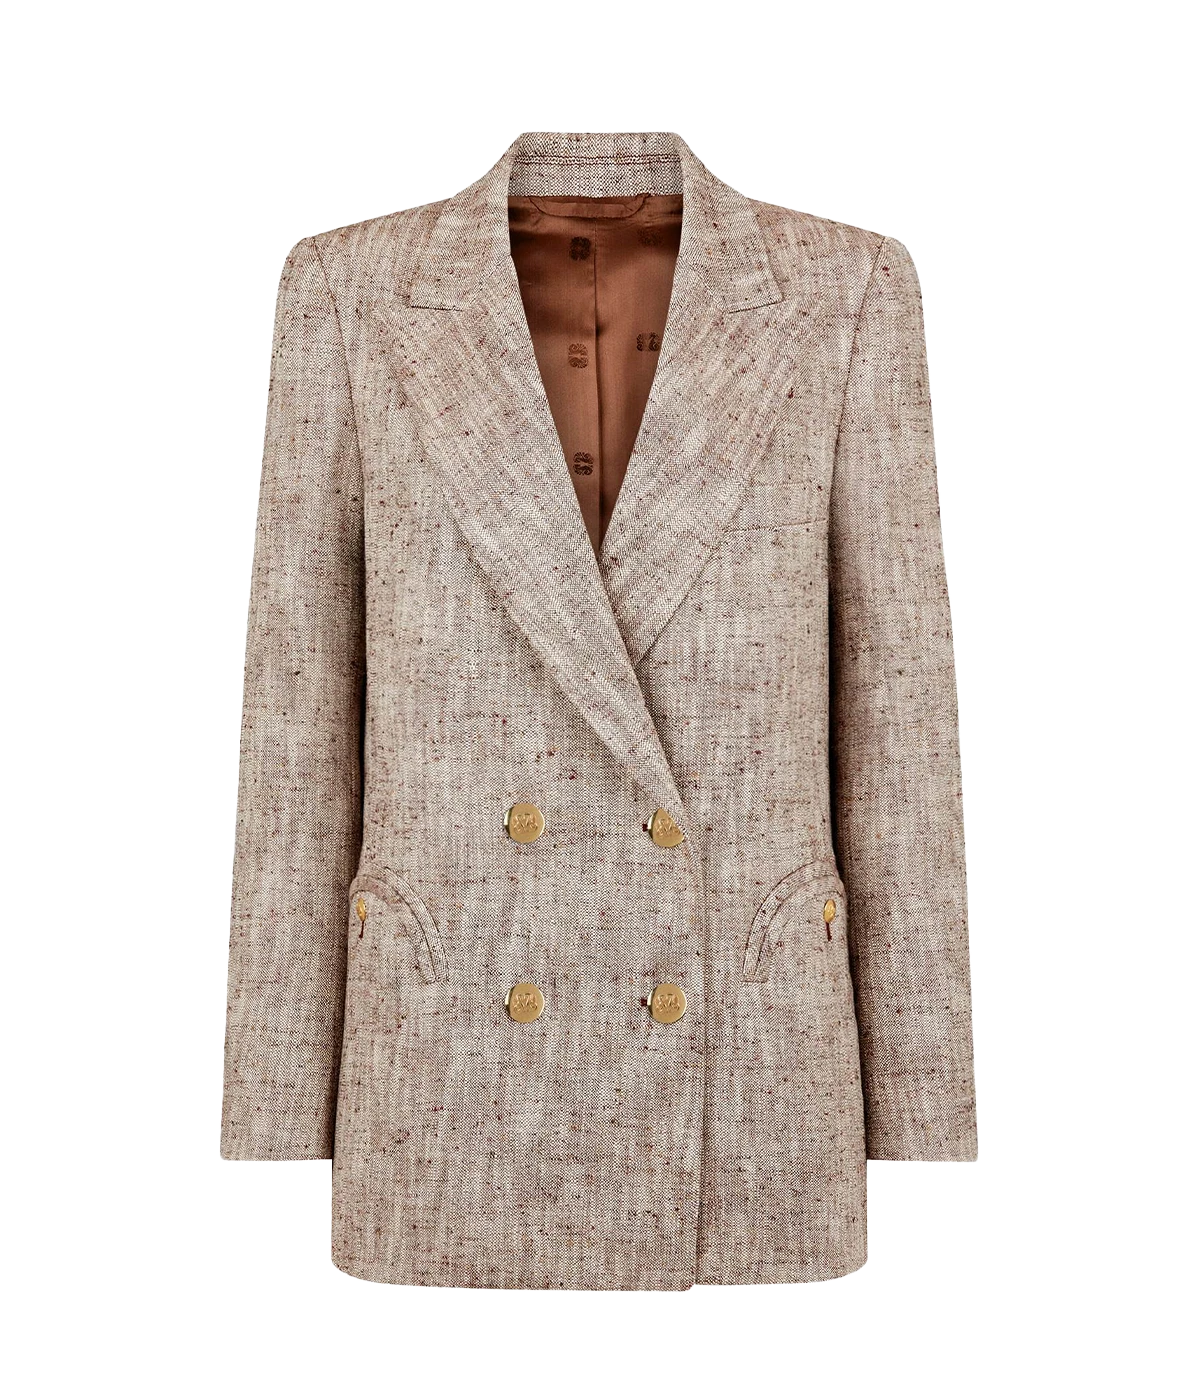 Lightweight and comfortable double breasted blazer crafted from  silk, hemp and cotton-blend slub with a speckled mélange weave and complementary gold-tone buttons. Superior quality tailoring for women.